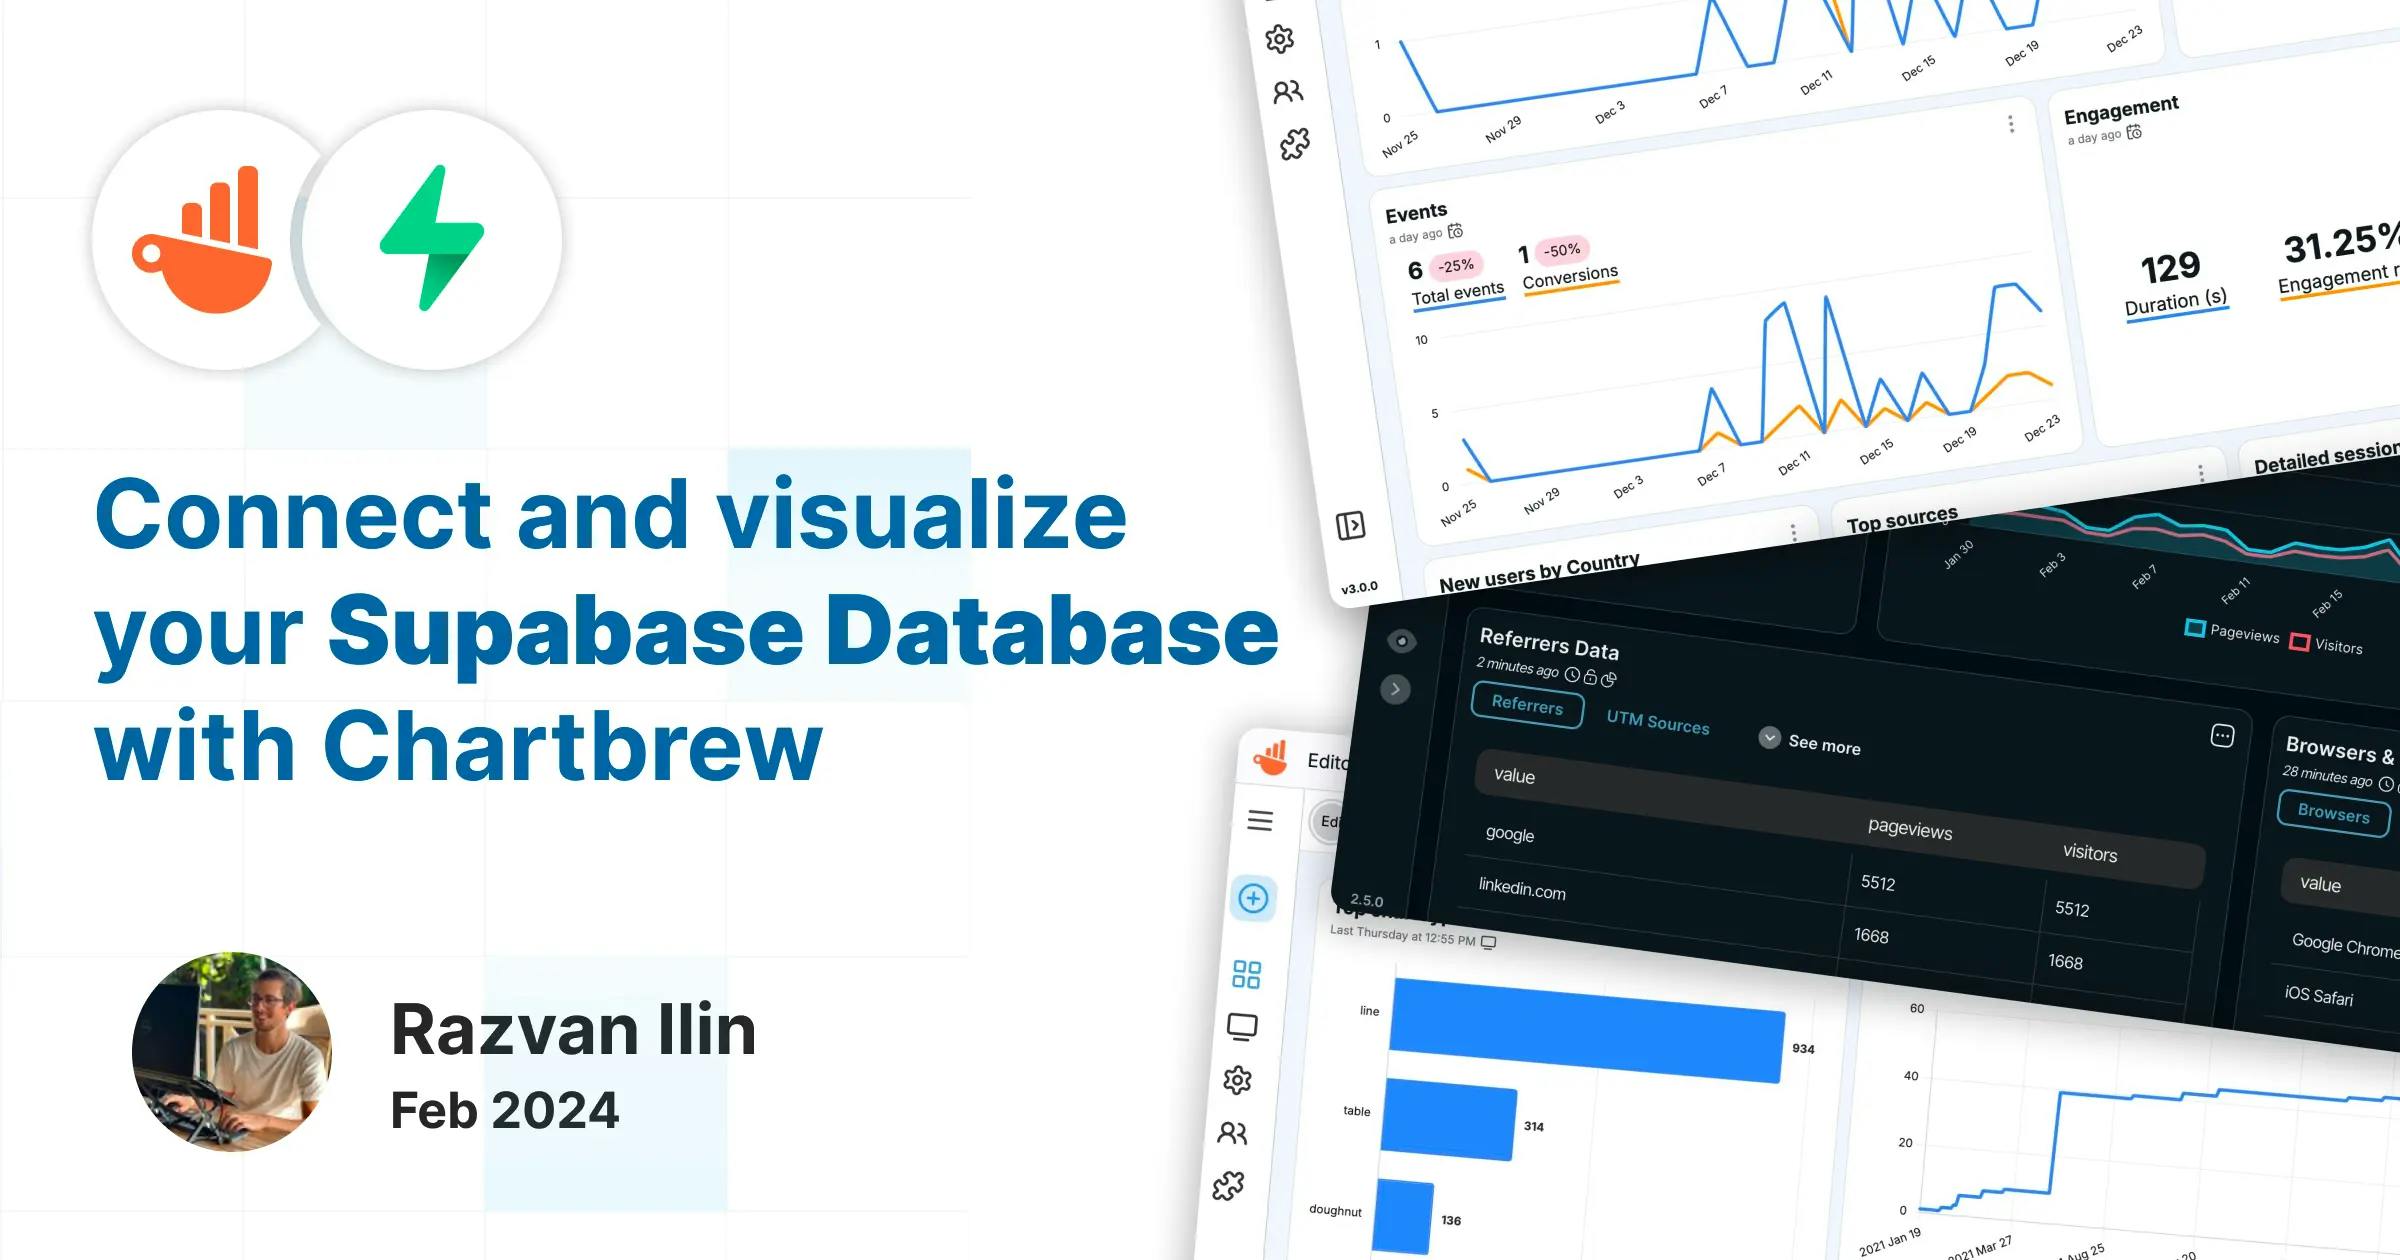 How to visualize Supabase.io data with Chartbrew